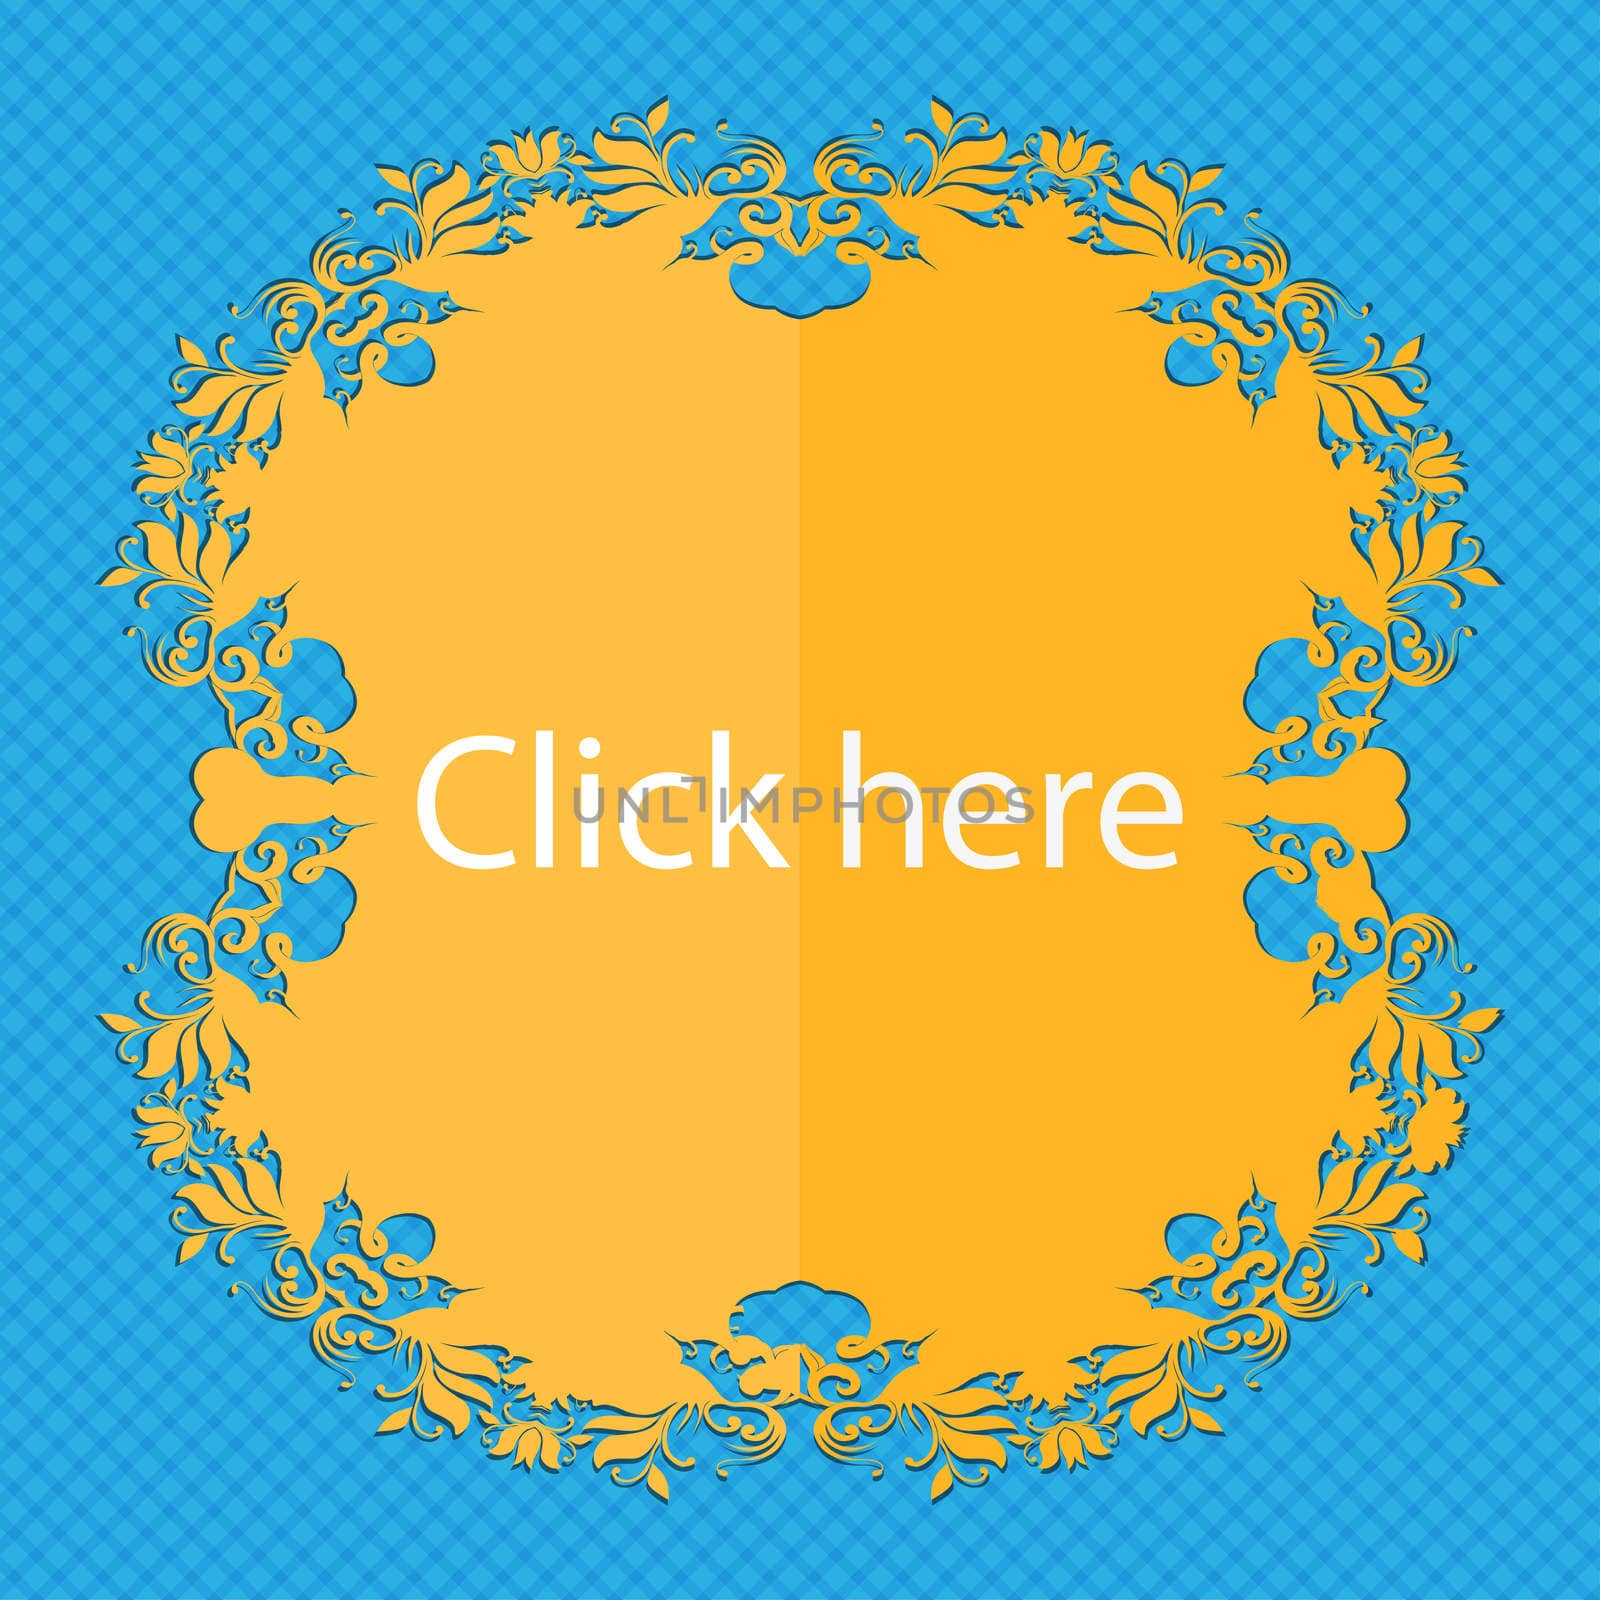 Click here sign icon. Press button. Floral flat design on a blue abstract background with place for your text. illustration